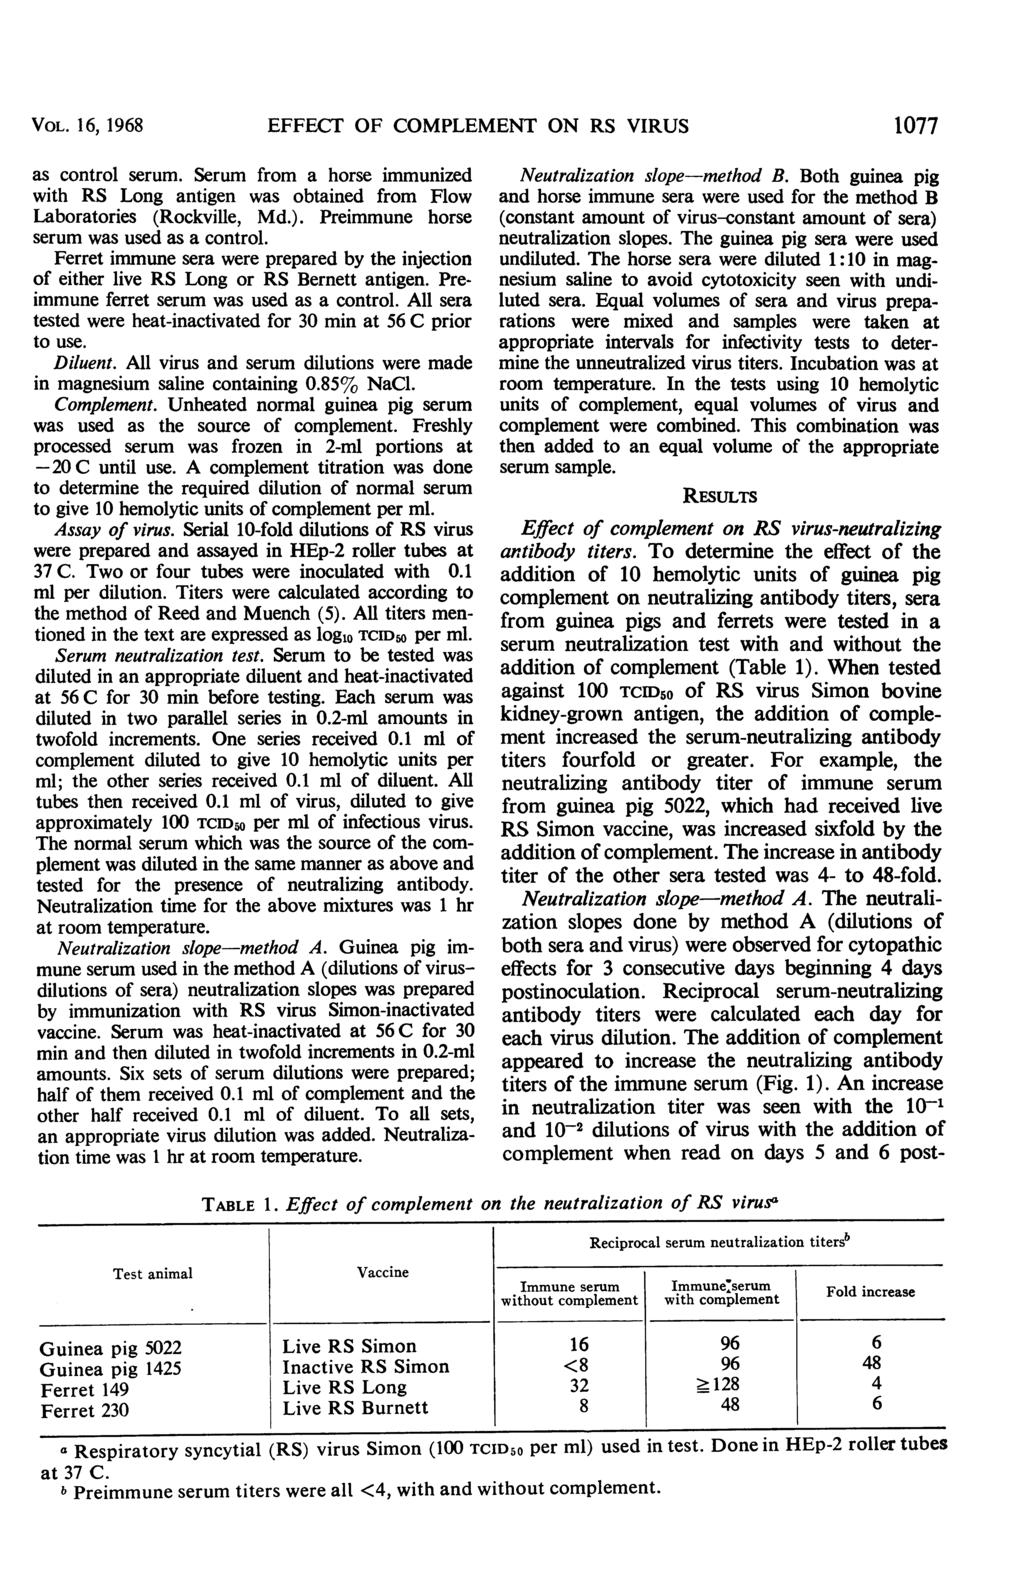 VOL. 16, 1968 EFFECT OF COMPLEMENT ON RS VIRUS 1077 as control serum. Serum from a horse immunized with RS Long antigen was obtained from Flow Laboratories (Rockville, Md.).